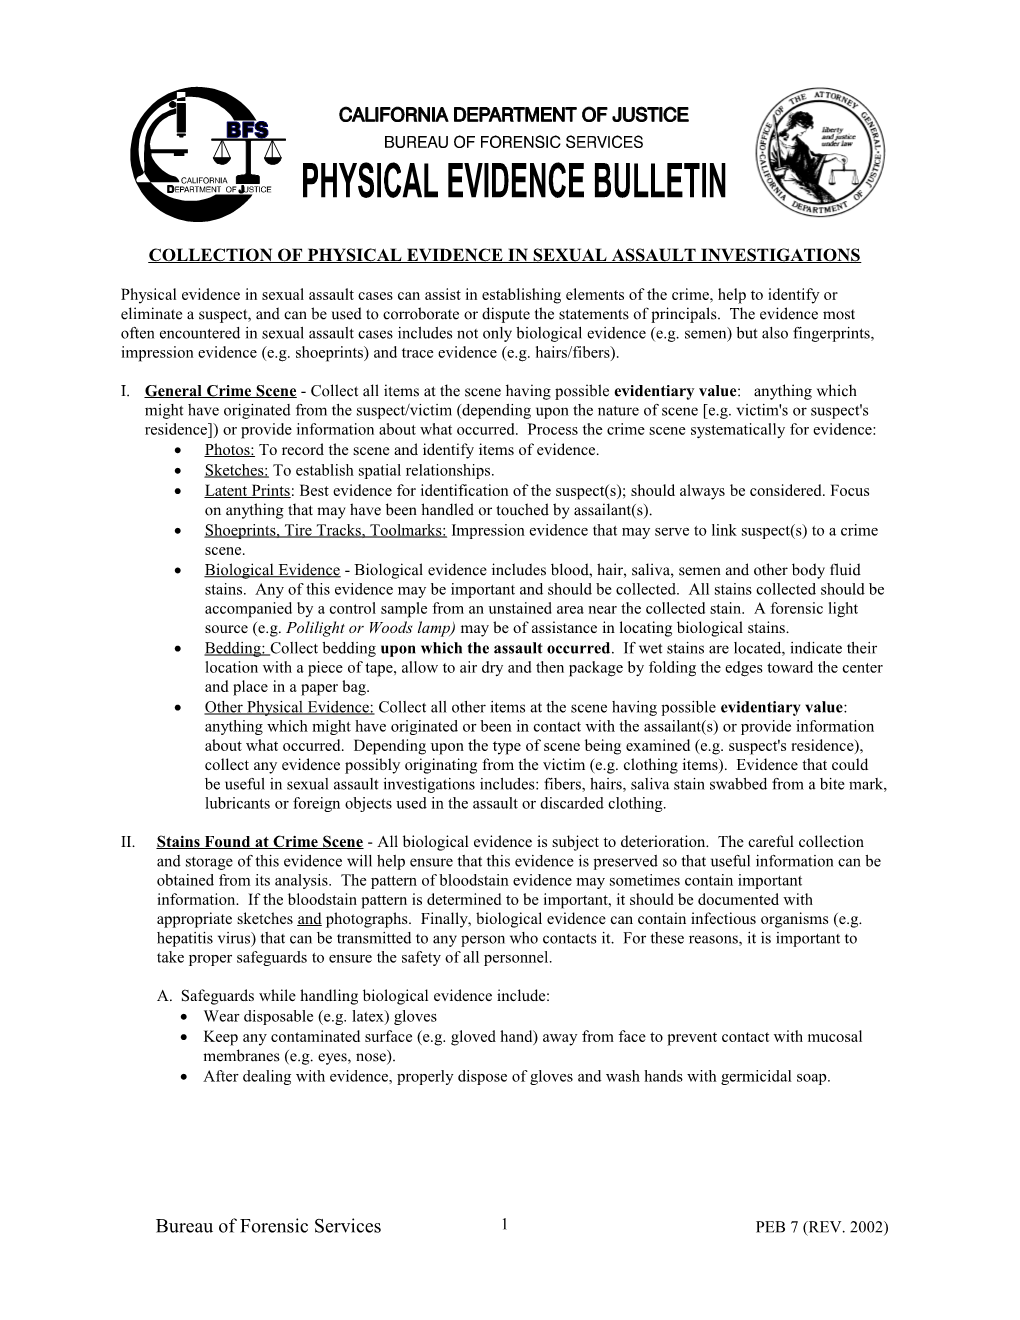 Collection of Physical Evidence in Sexual Assault Investigations